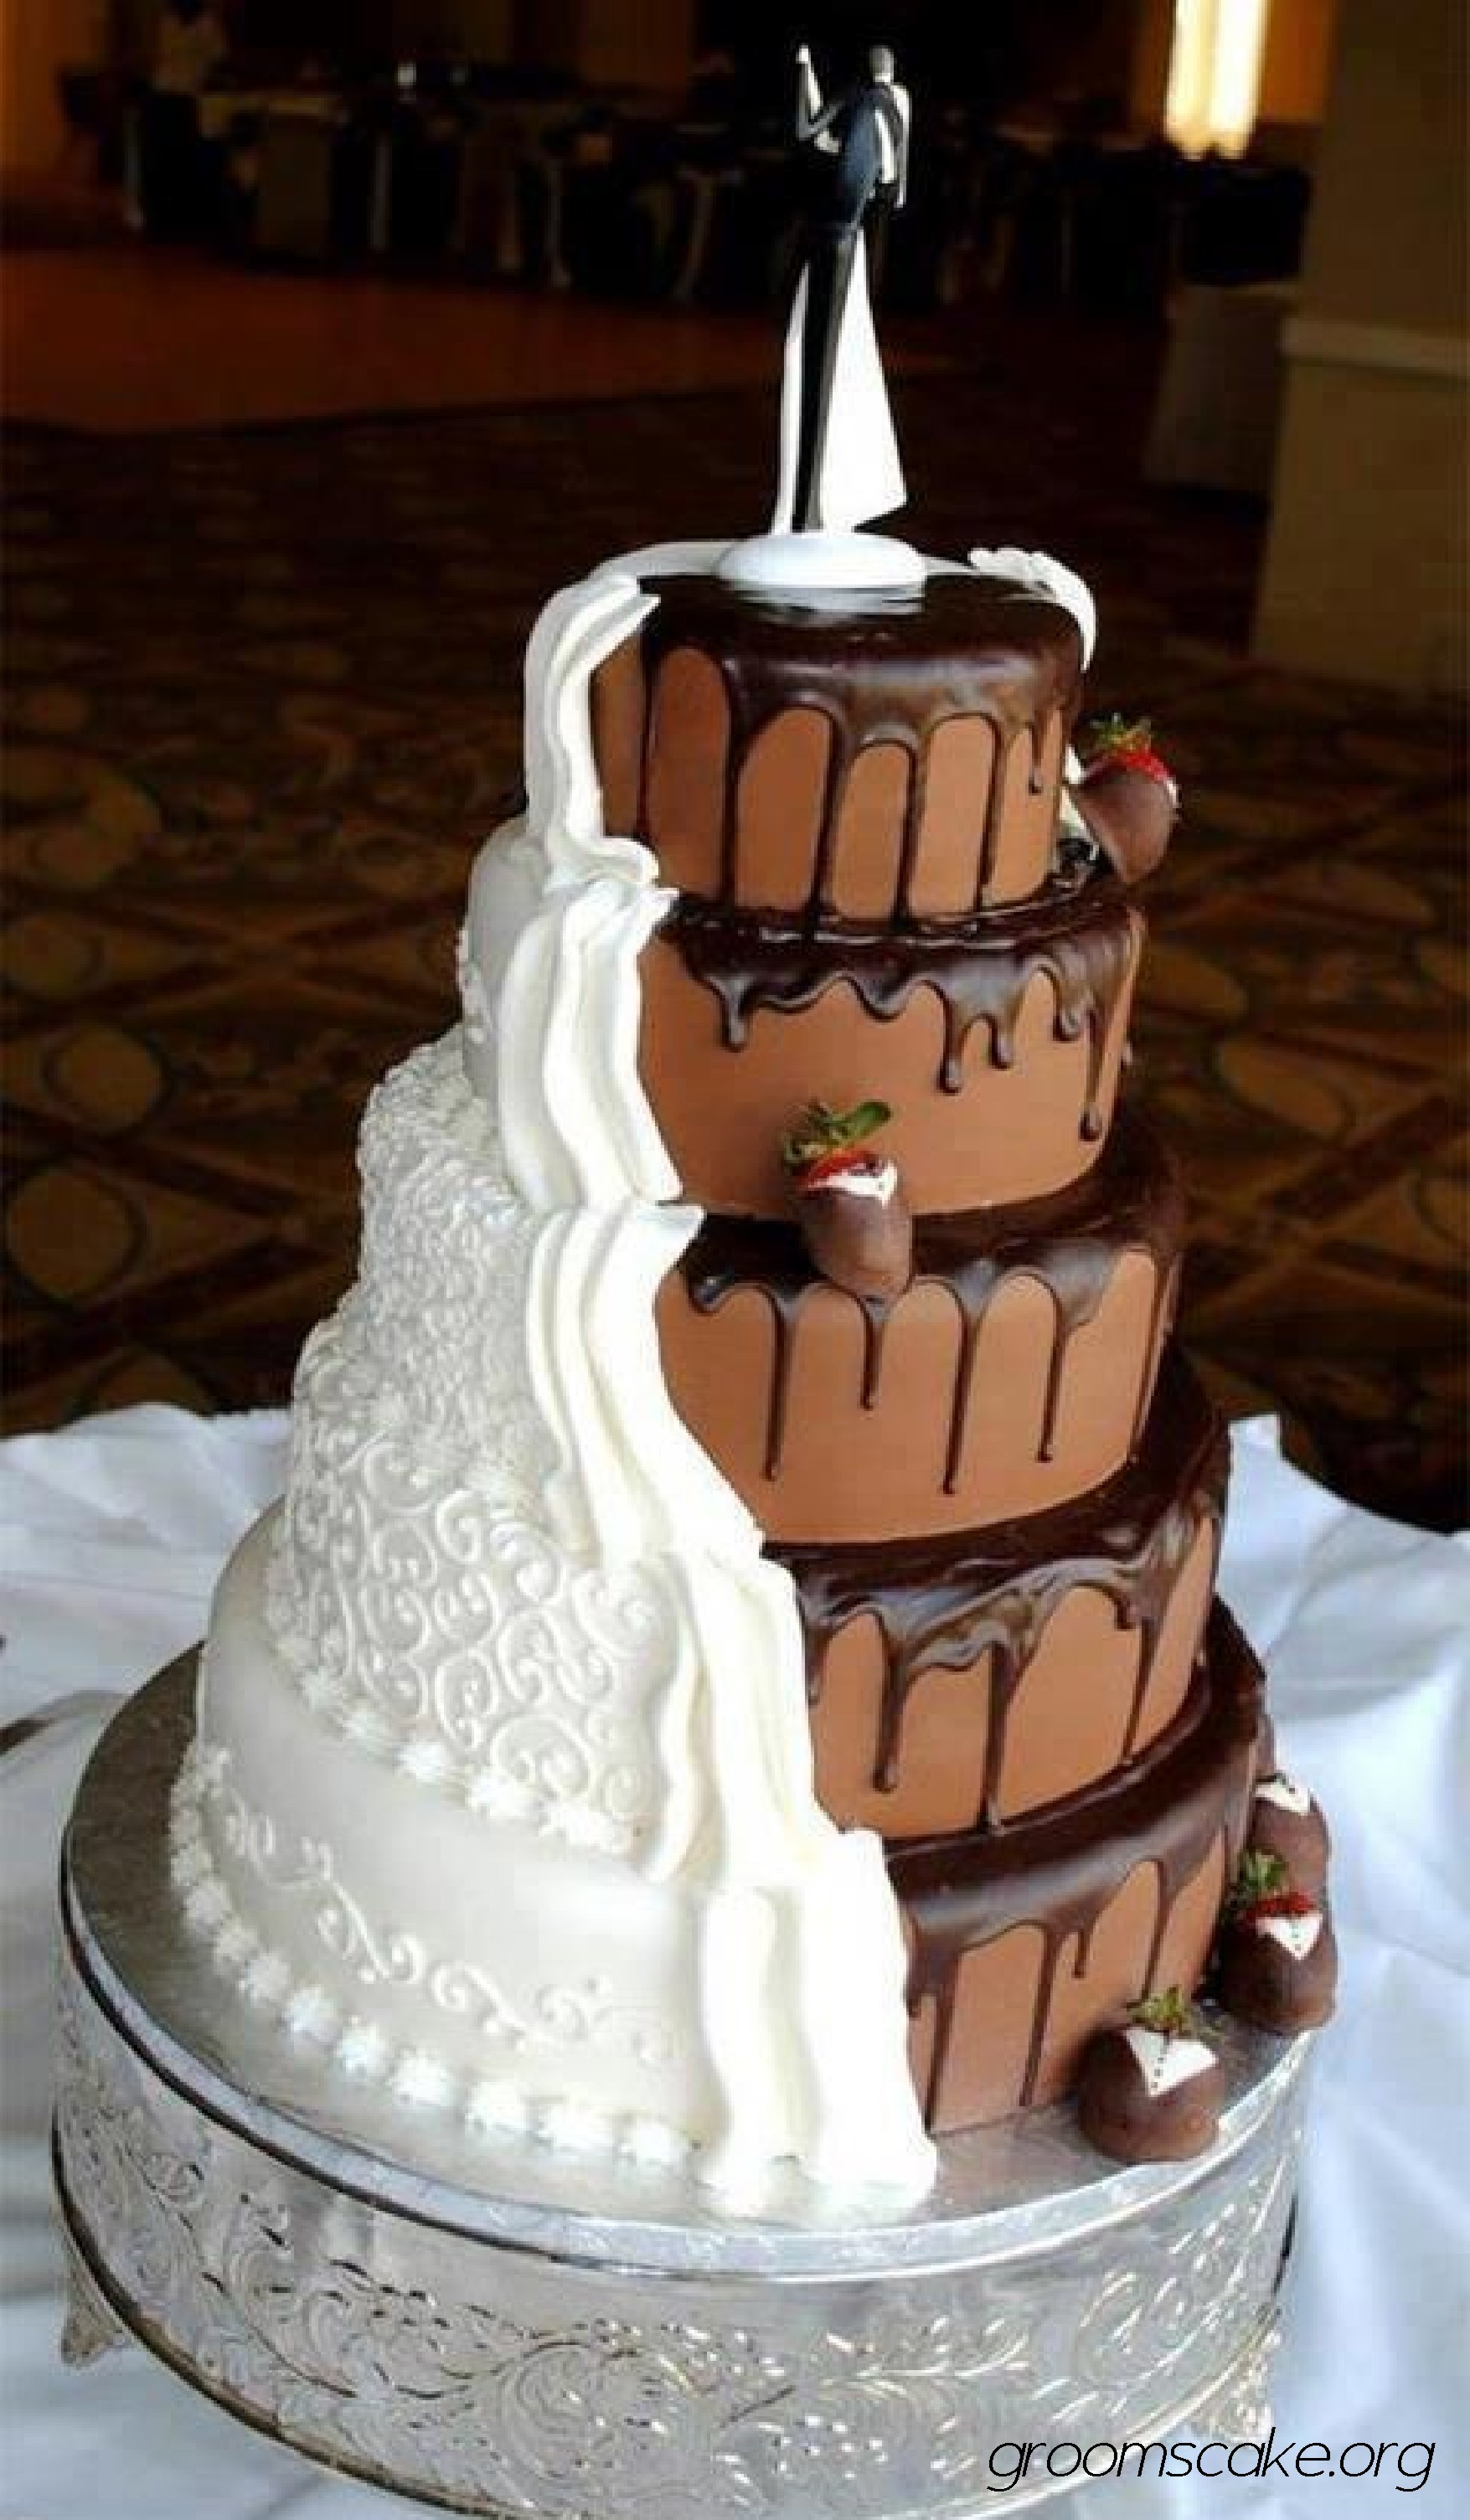 Wedding Cakes Bride And Groom
 Cake Archives Grooms Cake